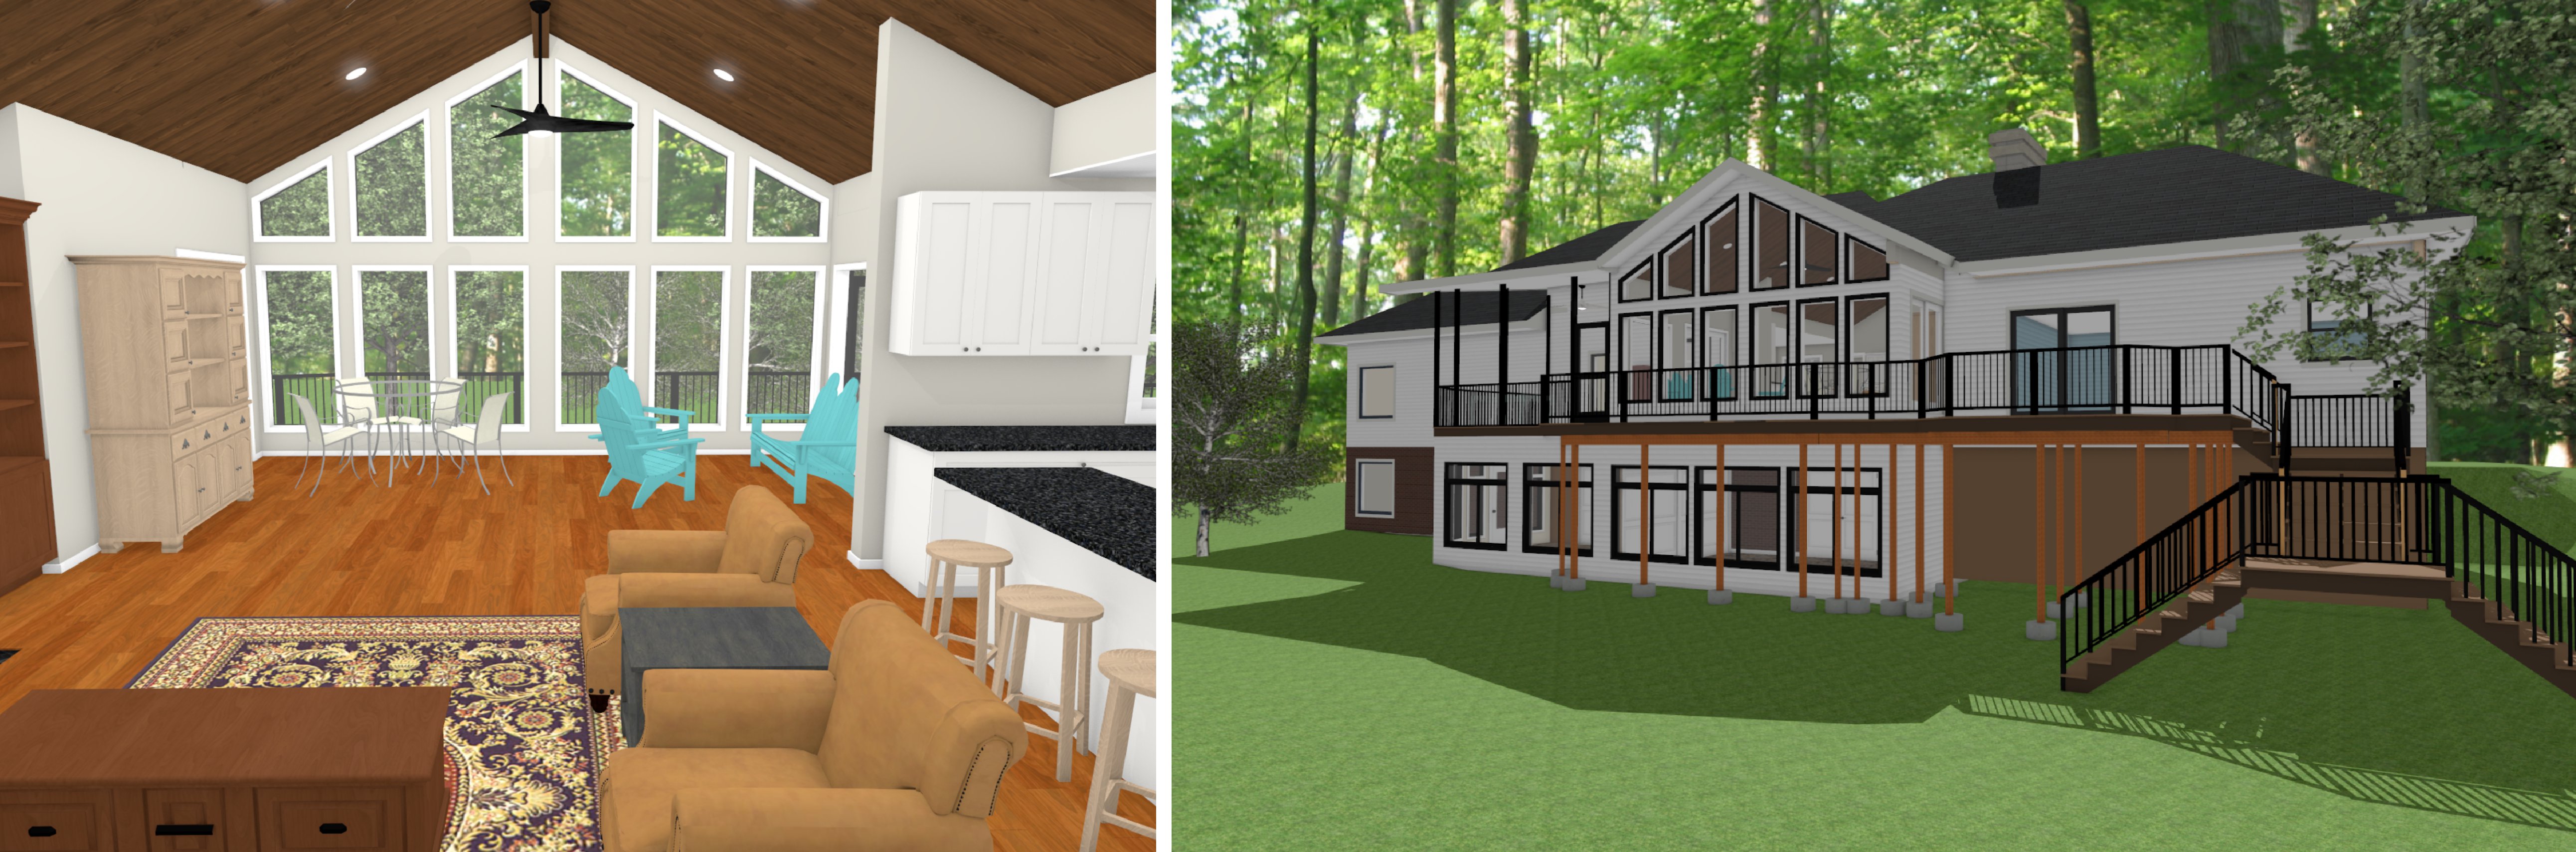 Renderings of interior and exterior of lake home